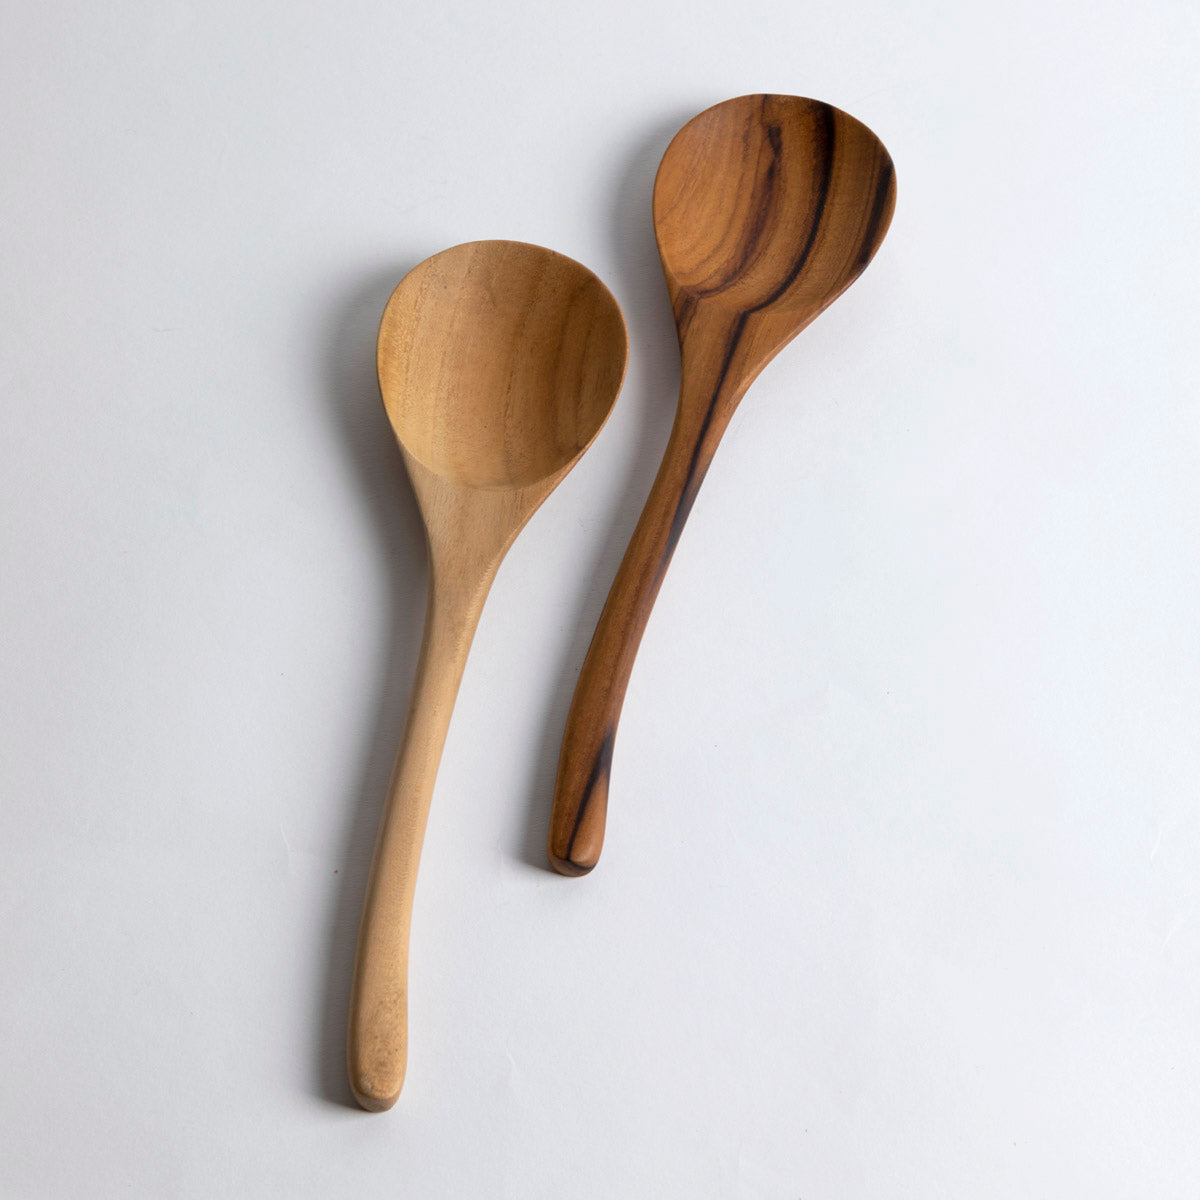 Large Hand-Carved Teak Spoon with Curved Handle